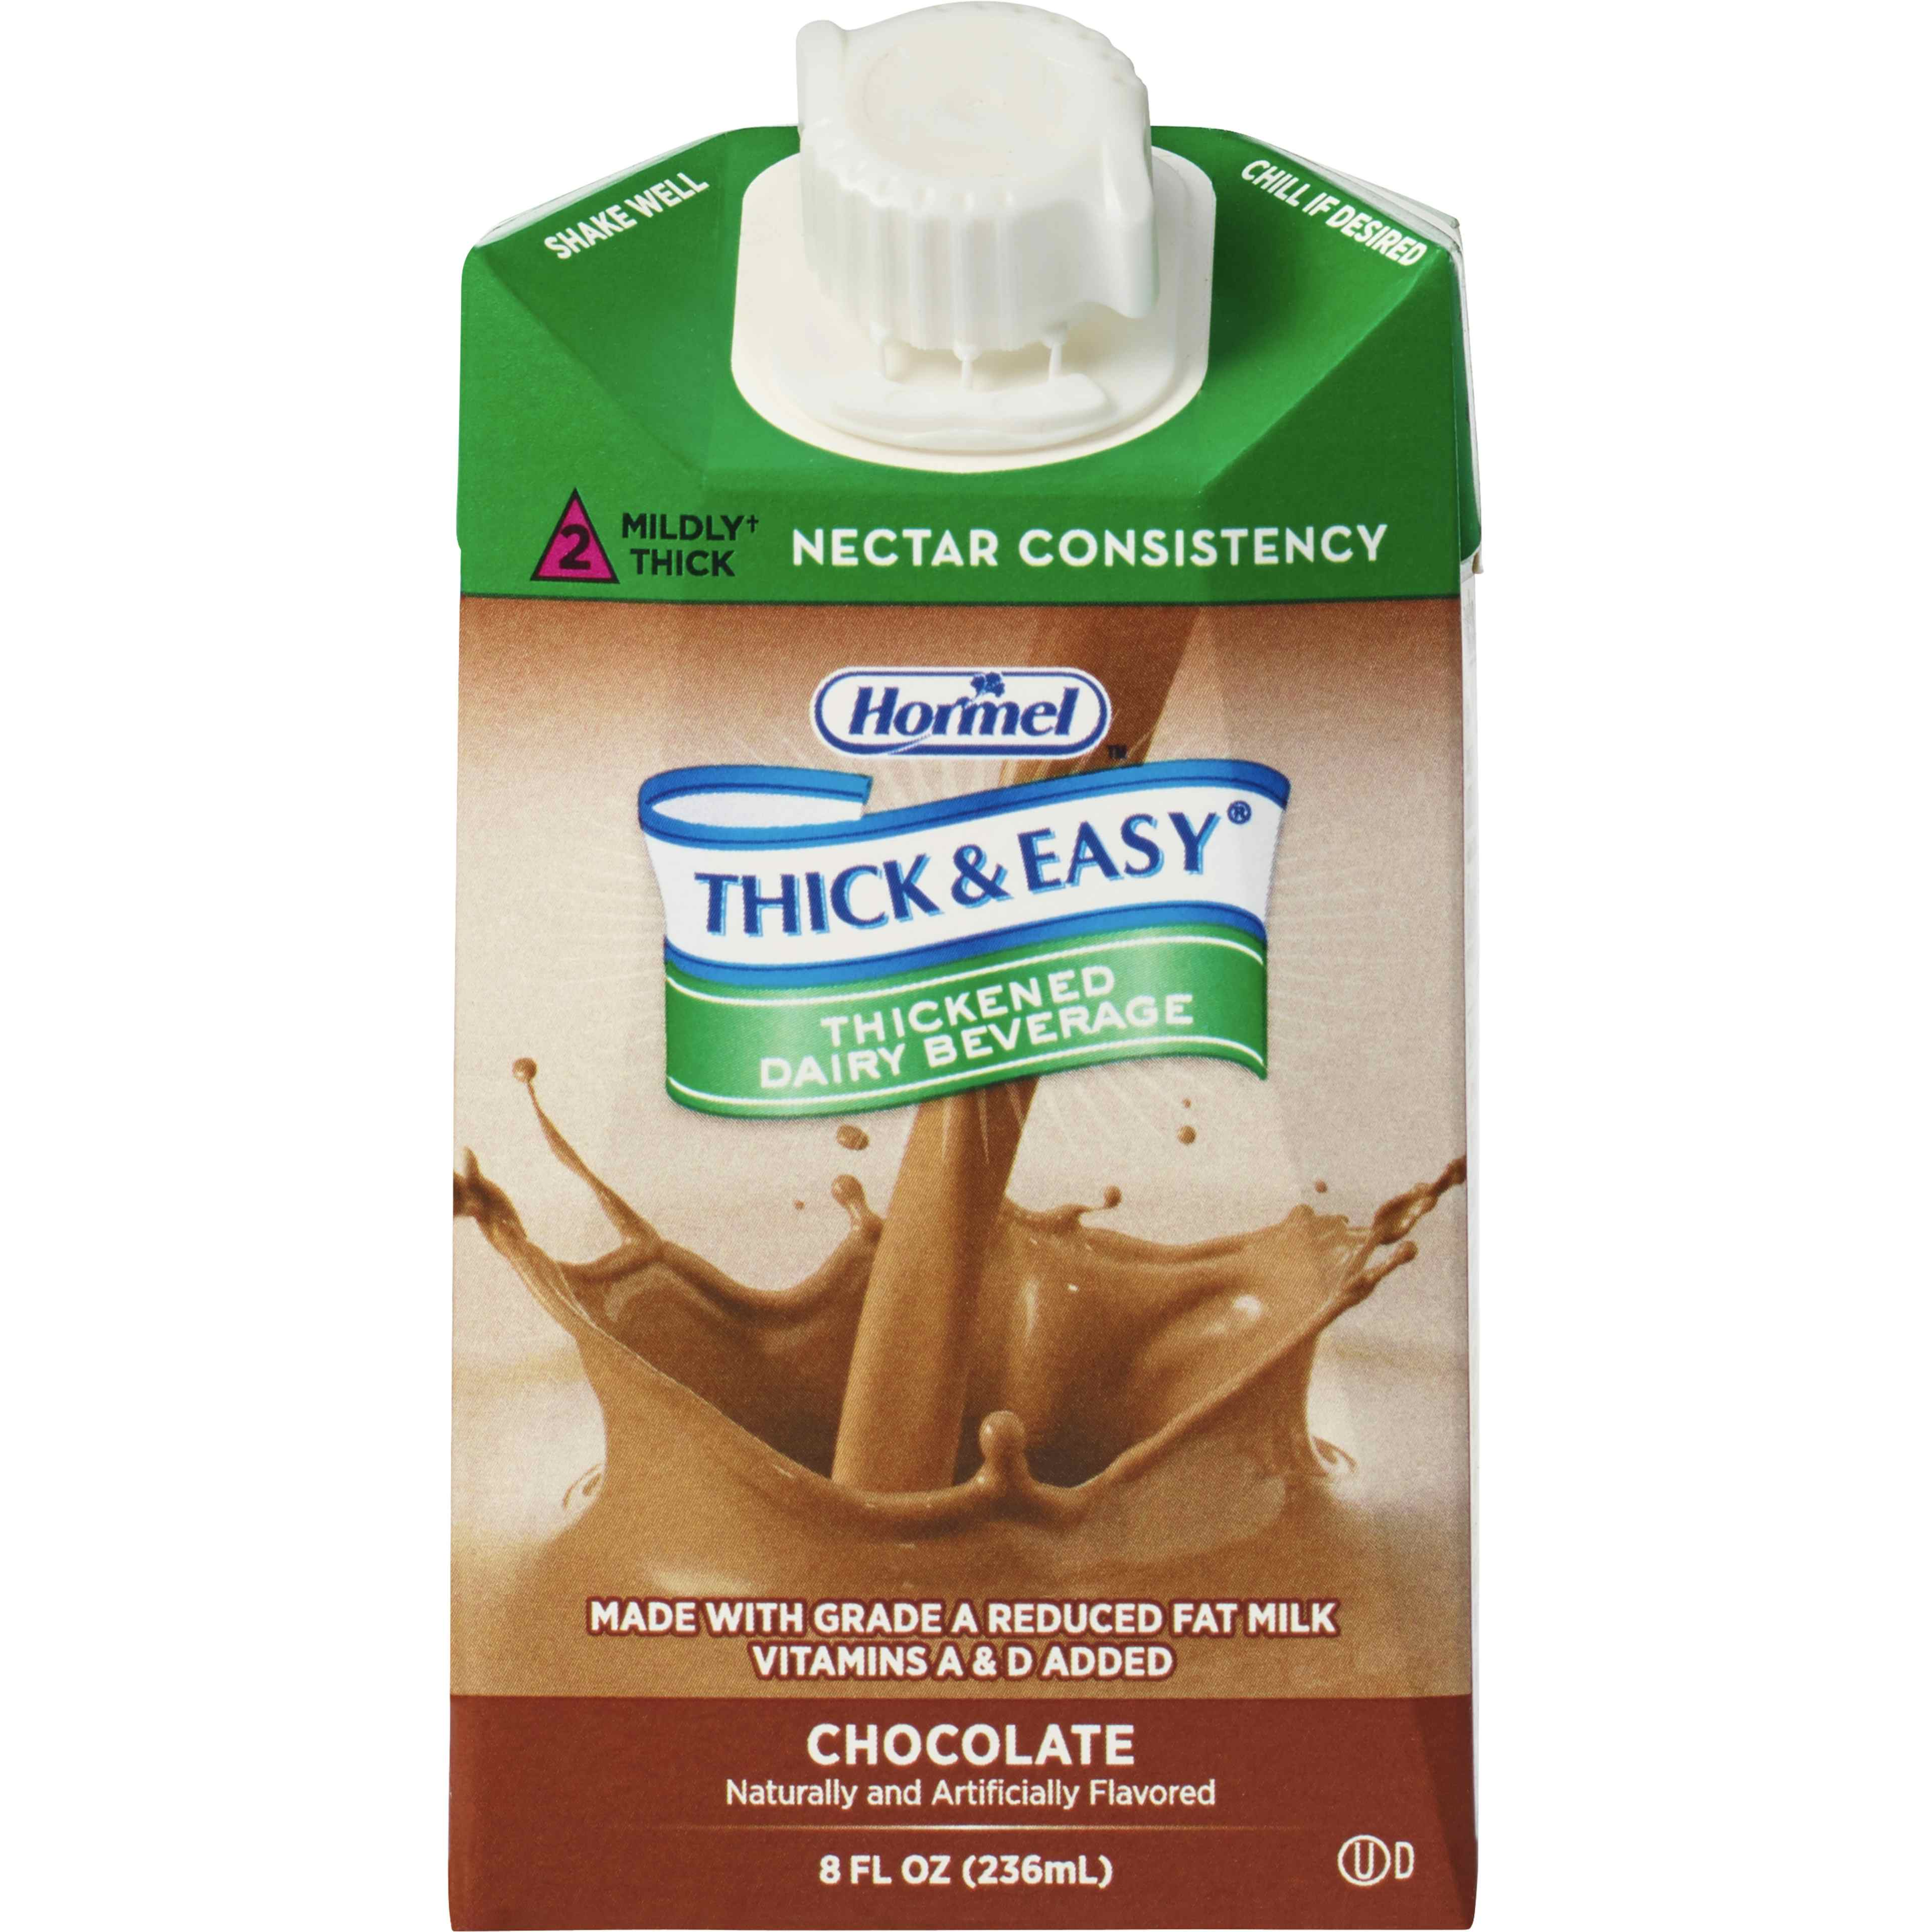 Hormel Thick & Easy Thickened Dairy Beverage, Chocolate, Nectar Consistency, 8 oz., 72447, Case of 27